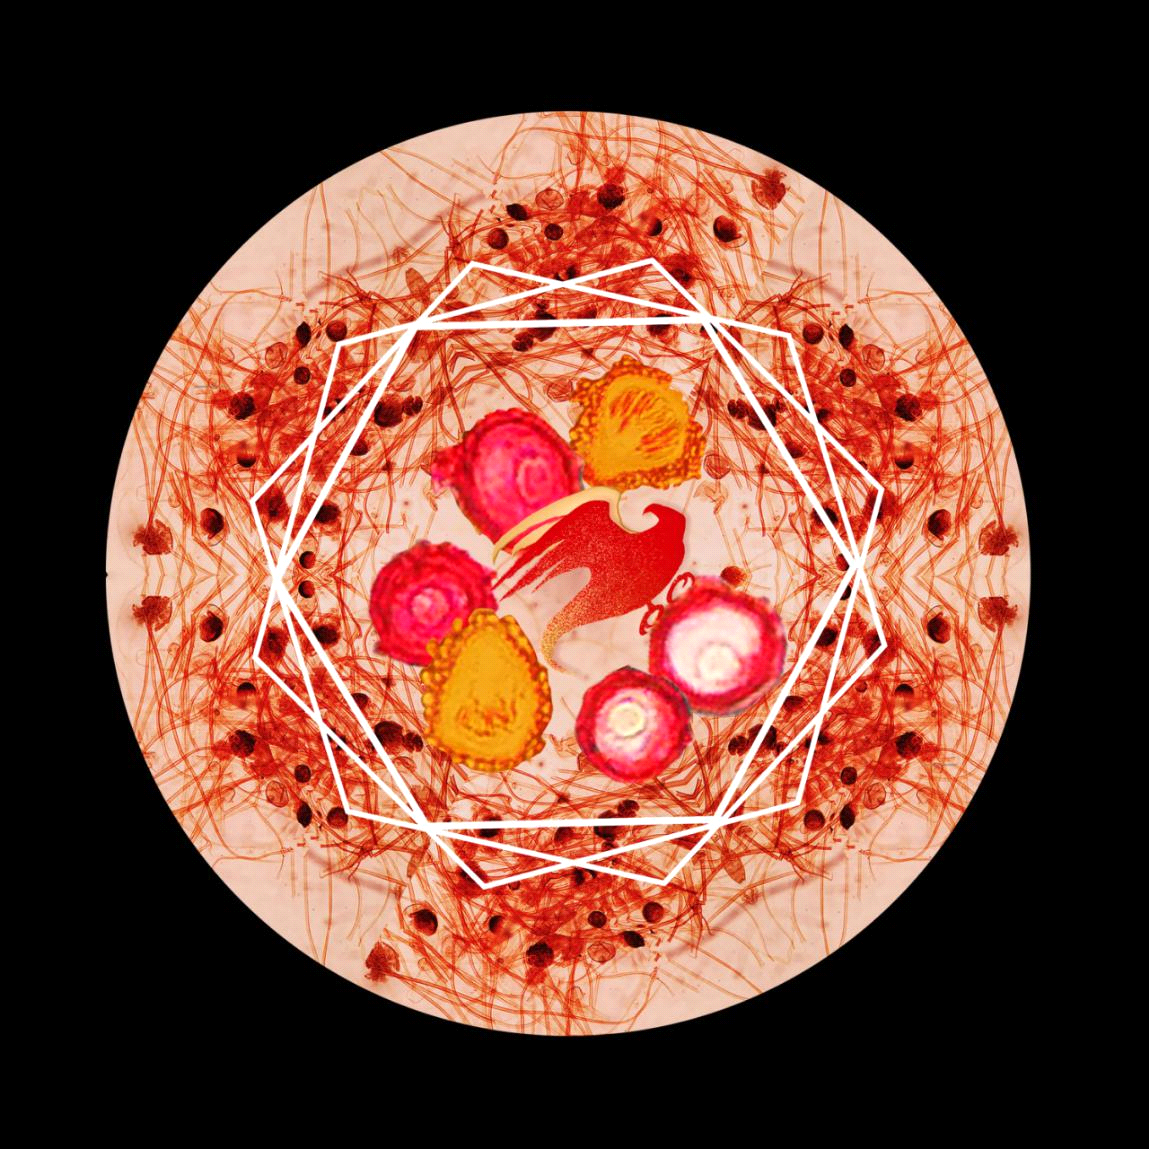 Students Create Artistic Pictures Using Micro Photographs of Pathogens